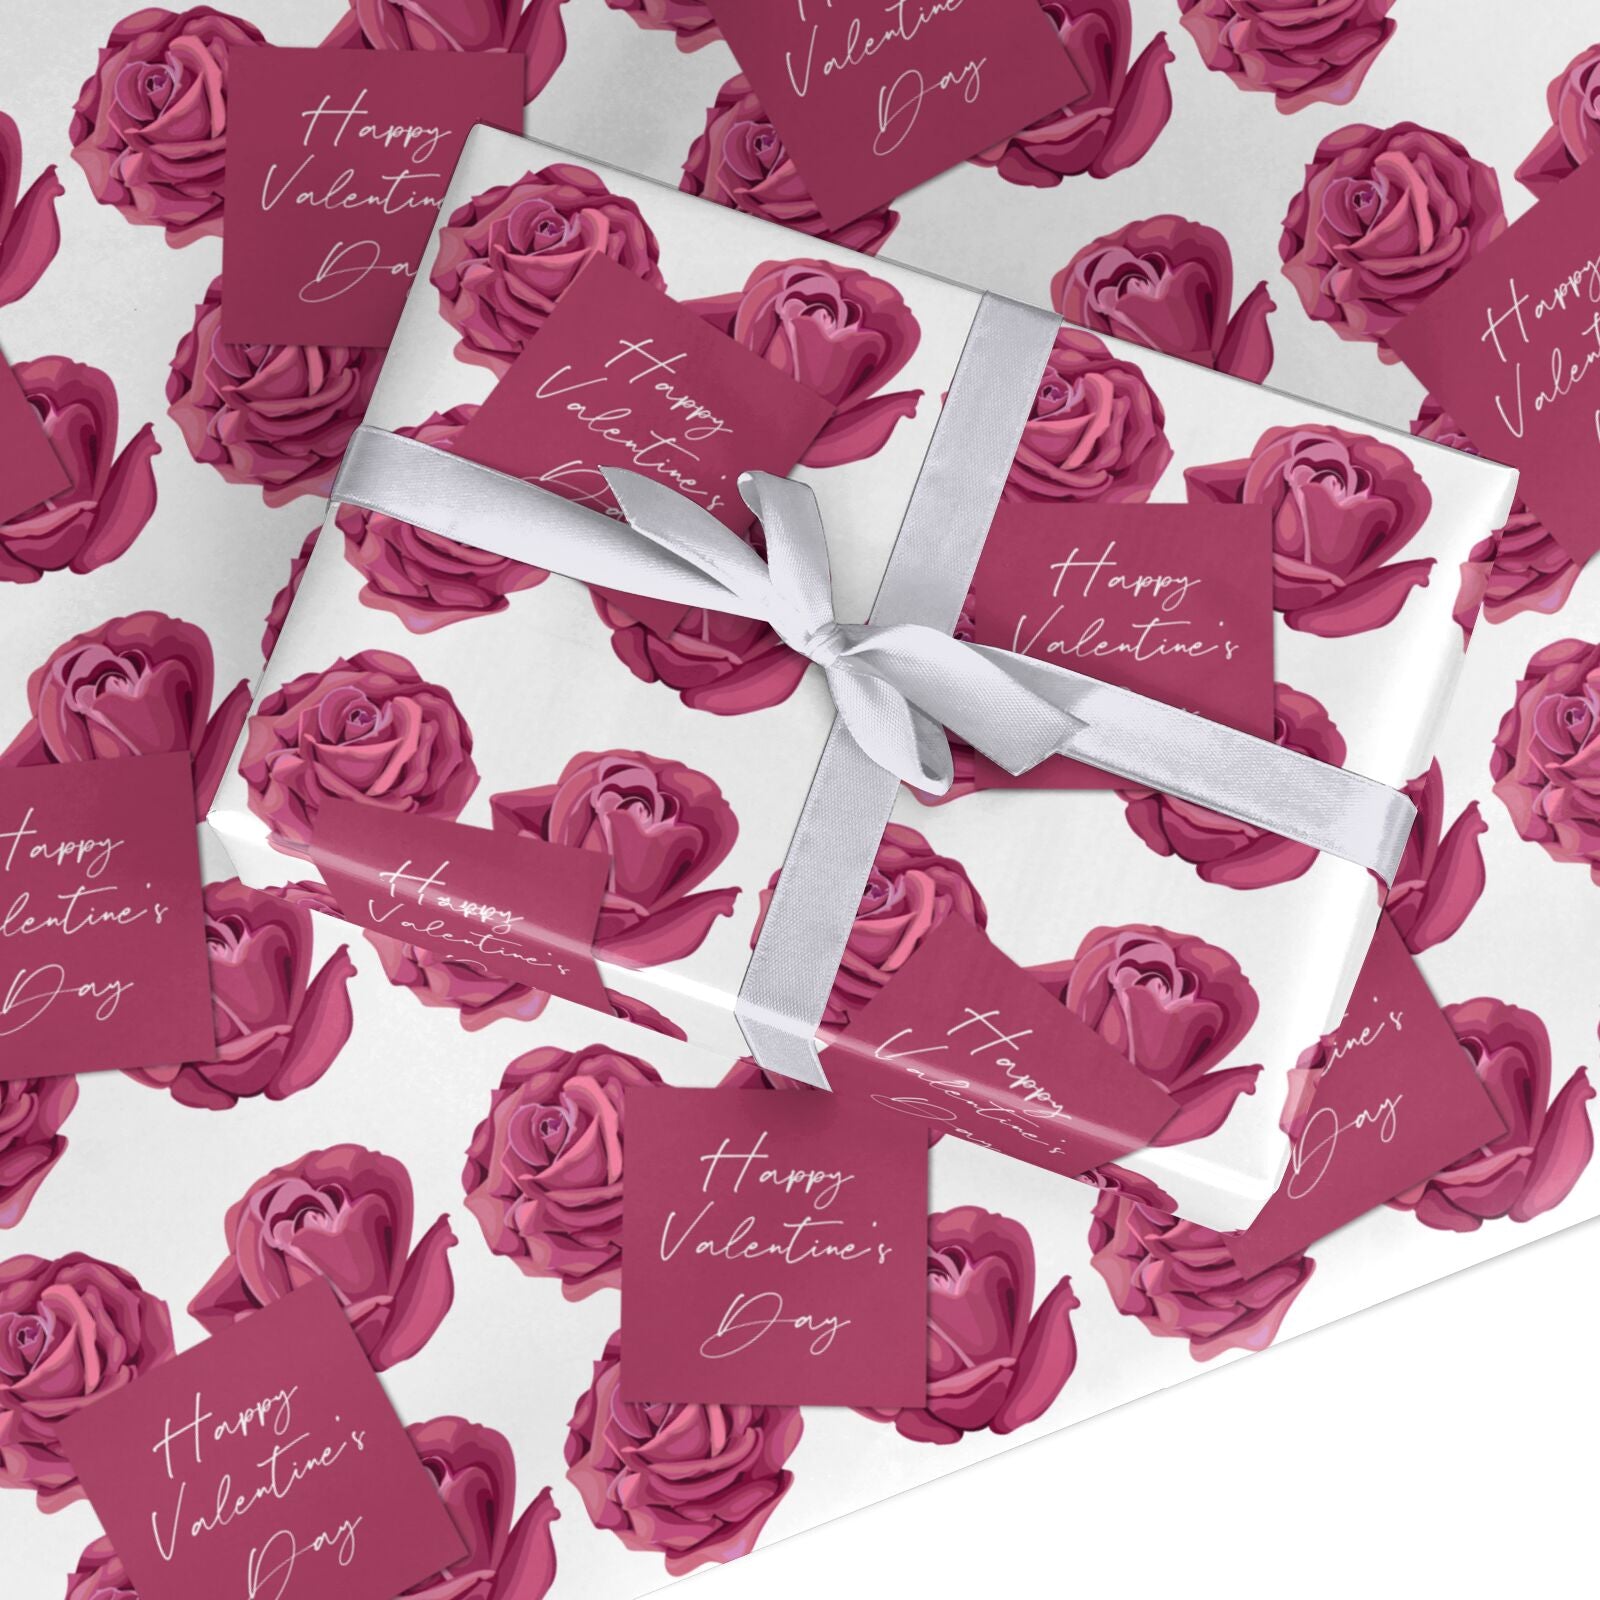 Flower Bouquet Wrapping Paper  Valentine's Day Paper Florist